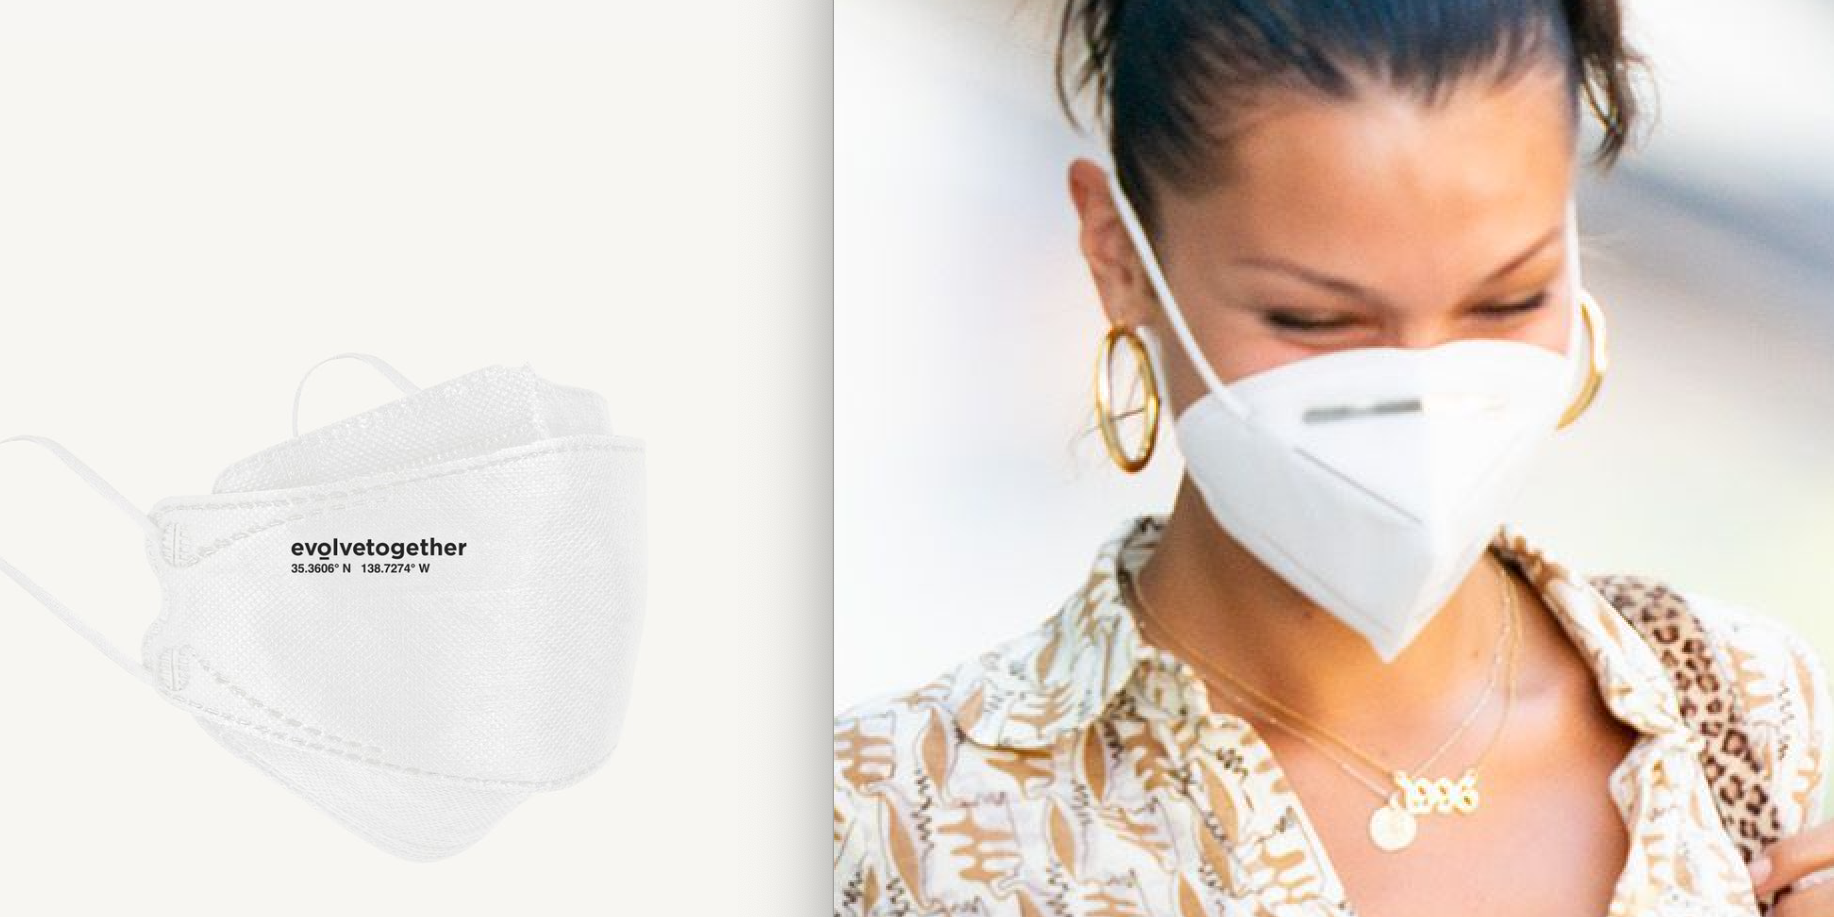 Hollywood's Favorite KN95 Masks Are Back in Stock—But Not for Long